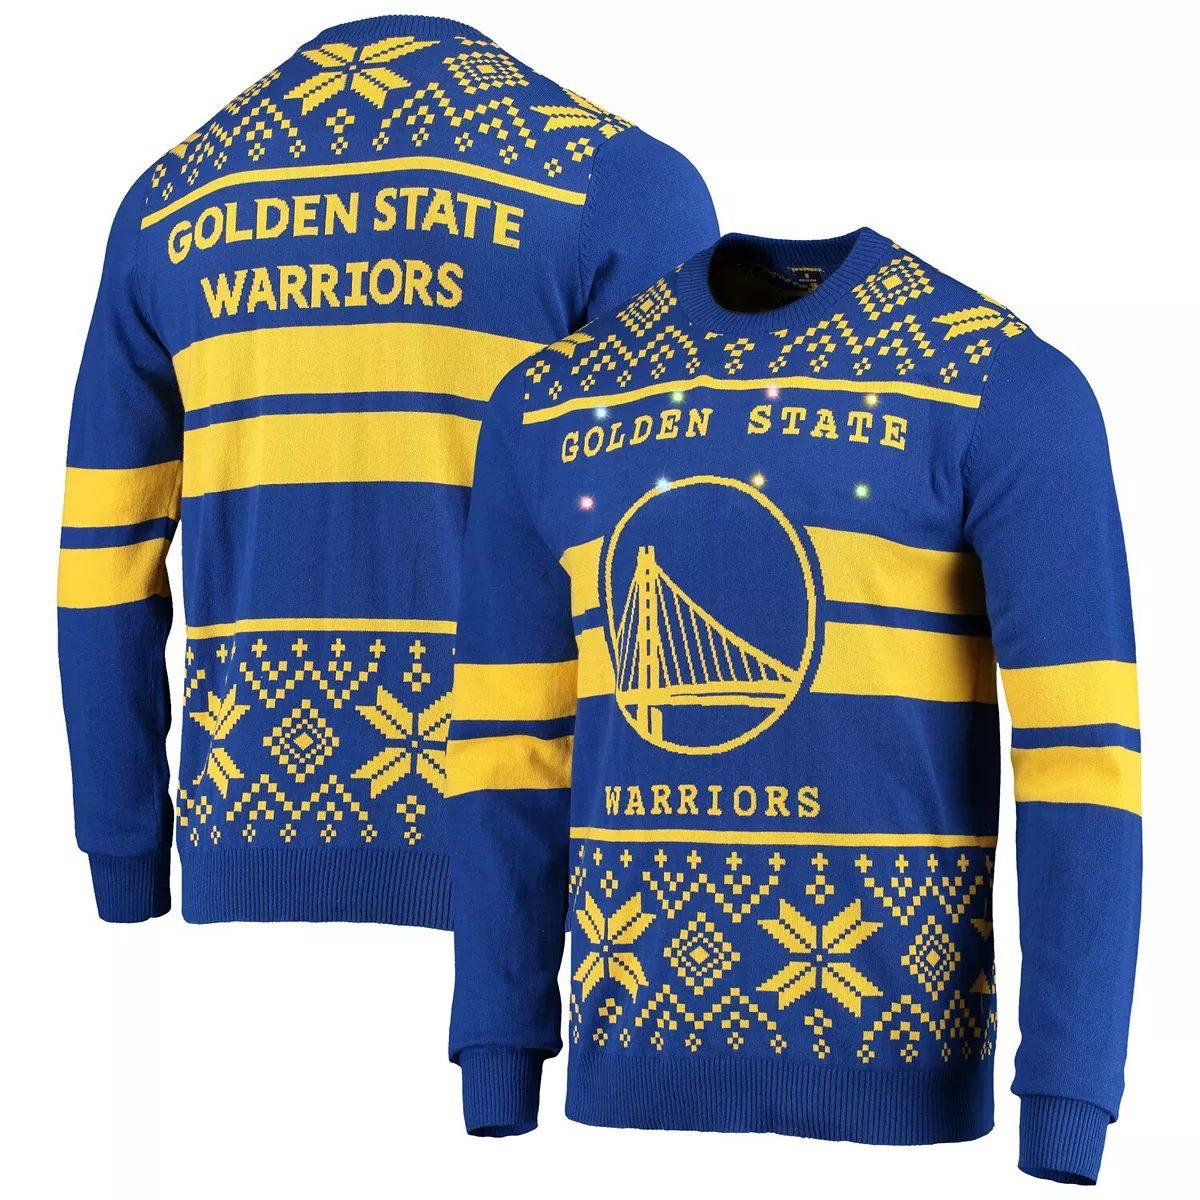 Golden State Warriors Sweater For Men And Women